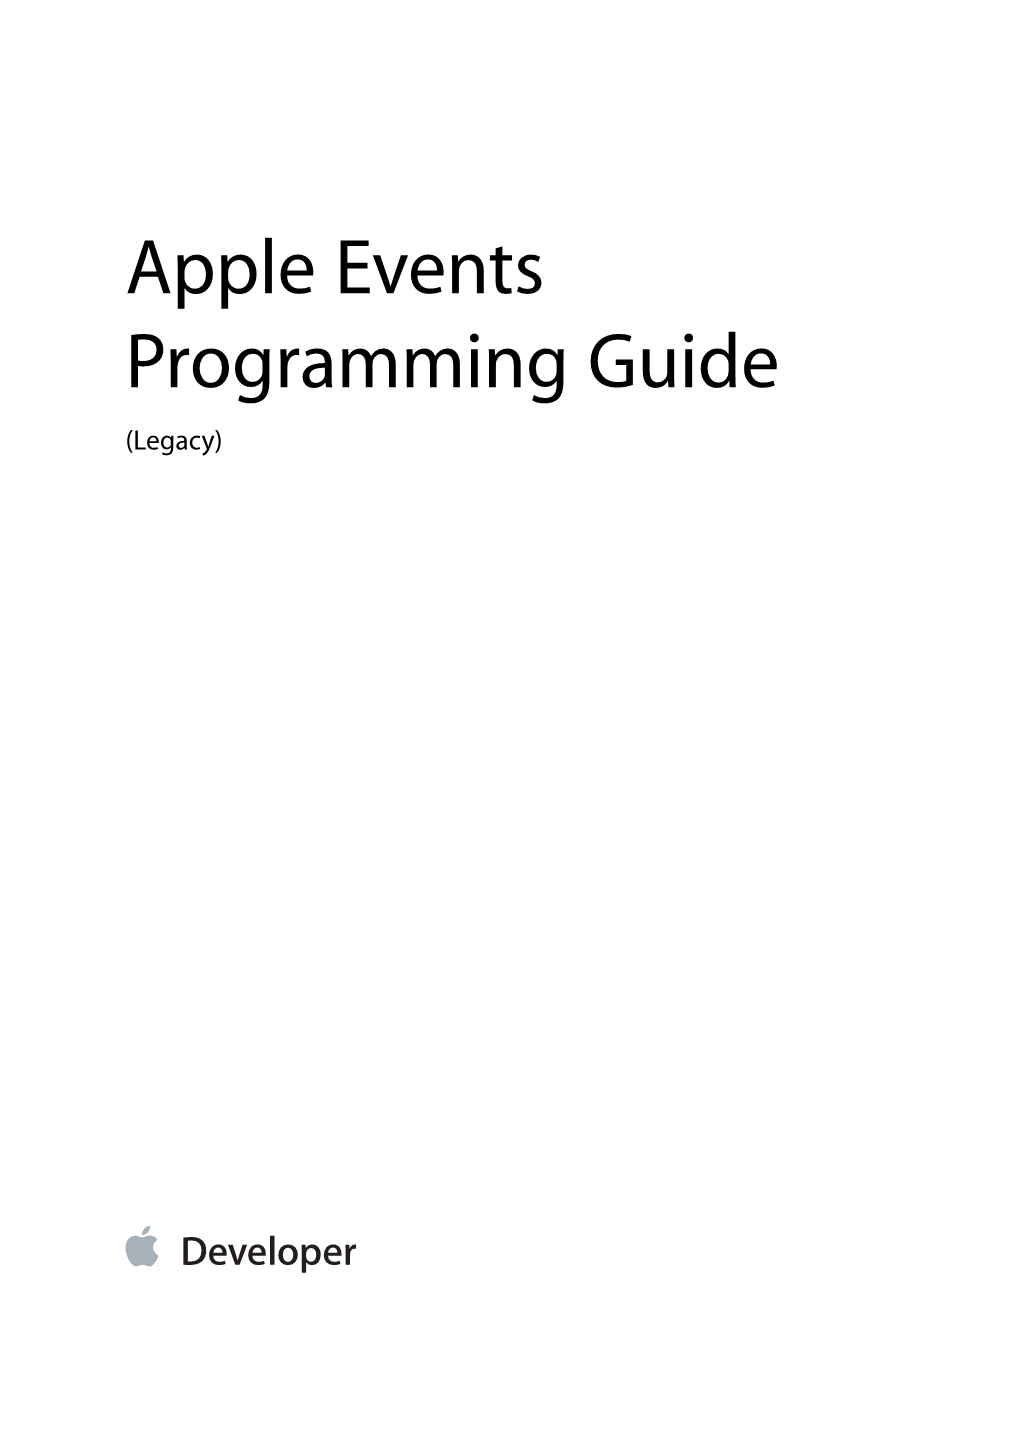 Apple Events Programming Guide (Legacy) Contents